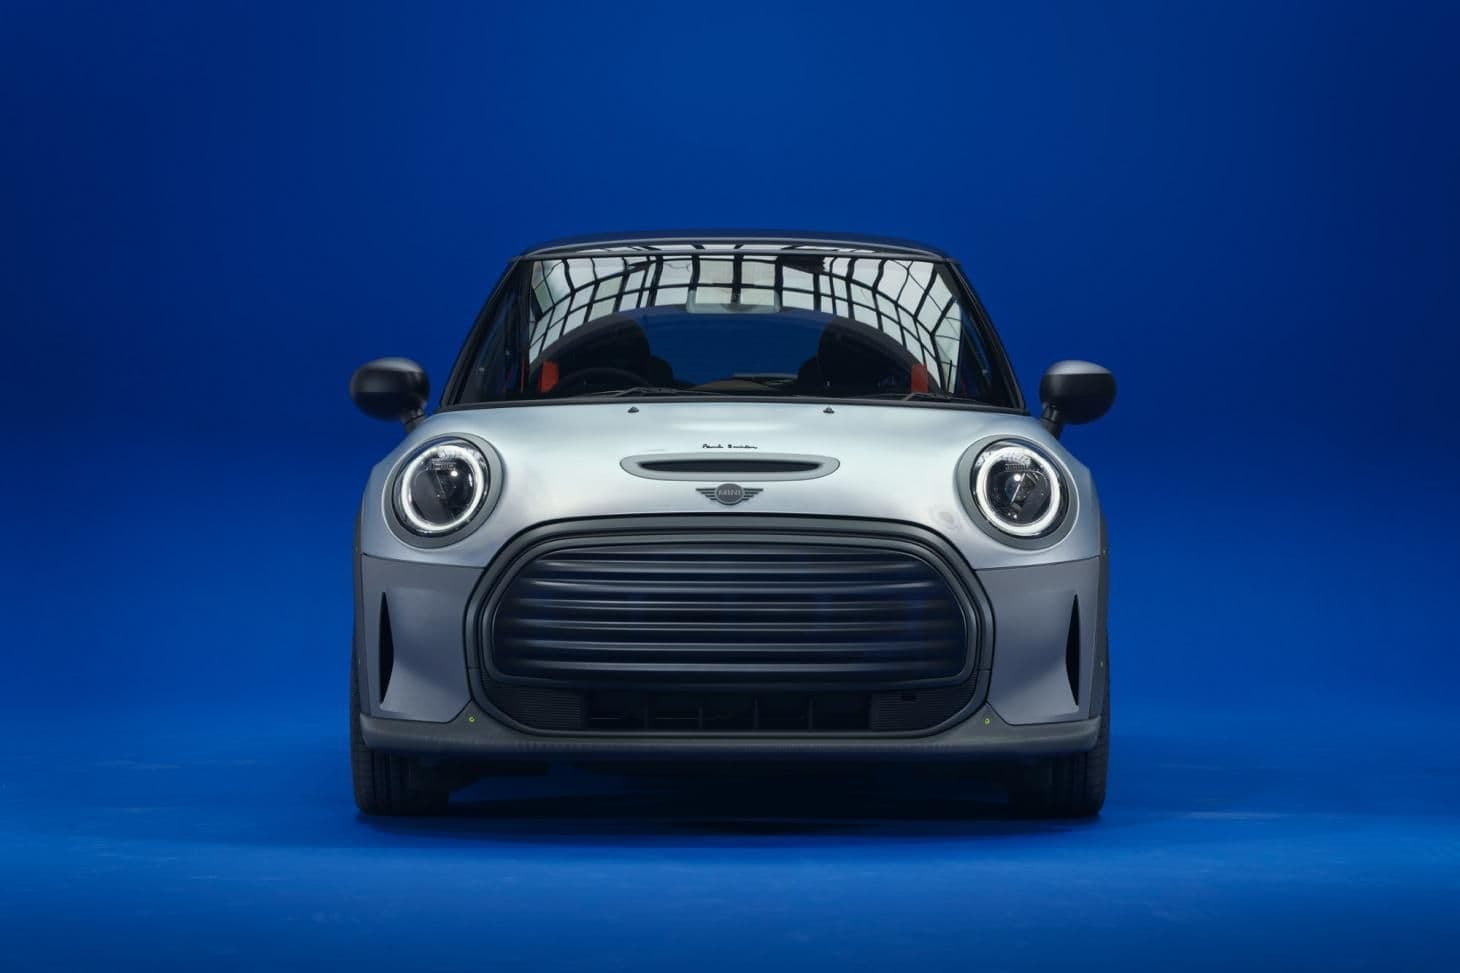 Front view of the new MINI Strip, designed by fashion designer Paul Smith.